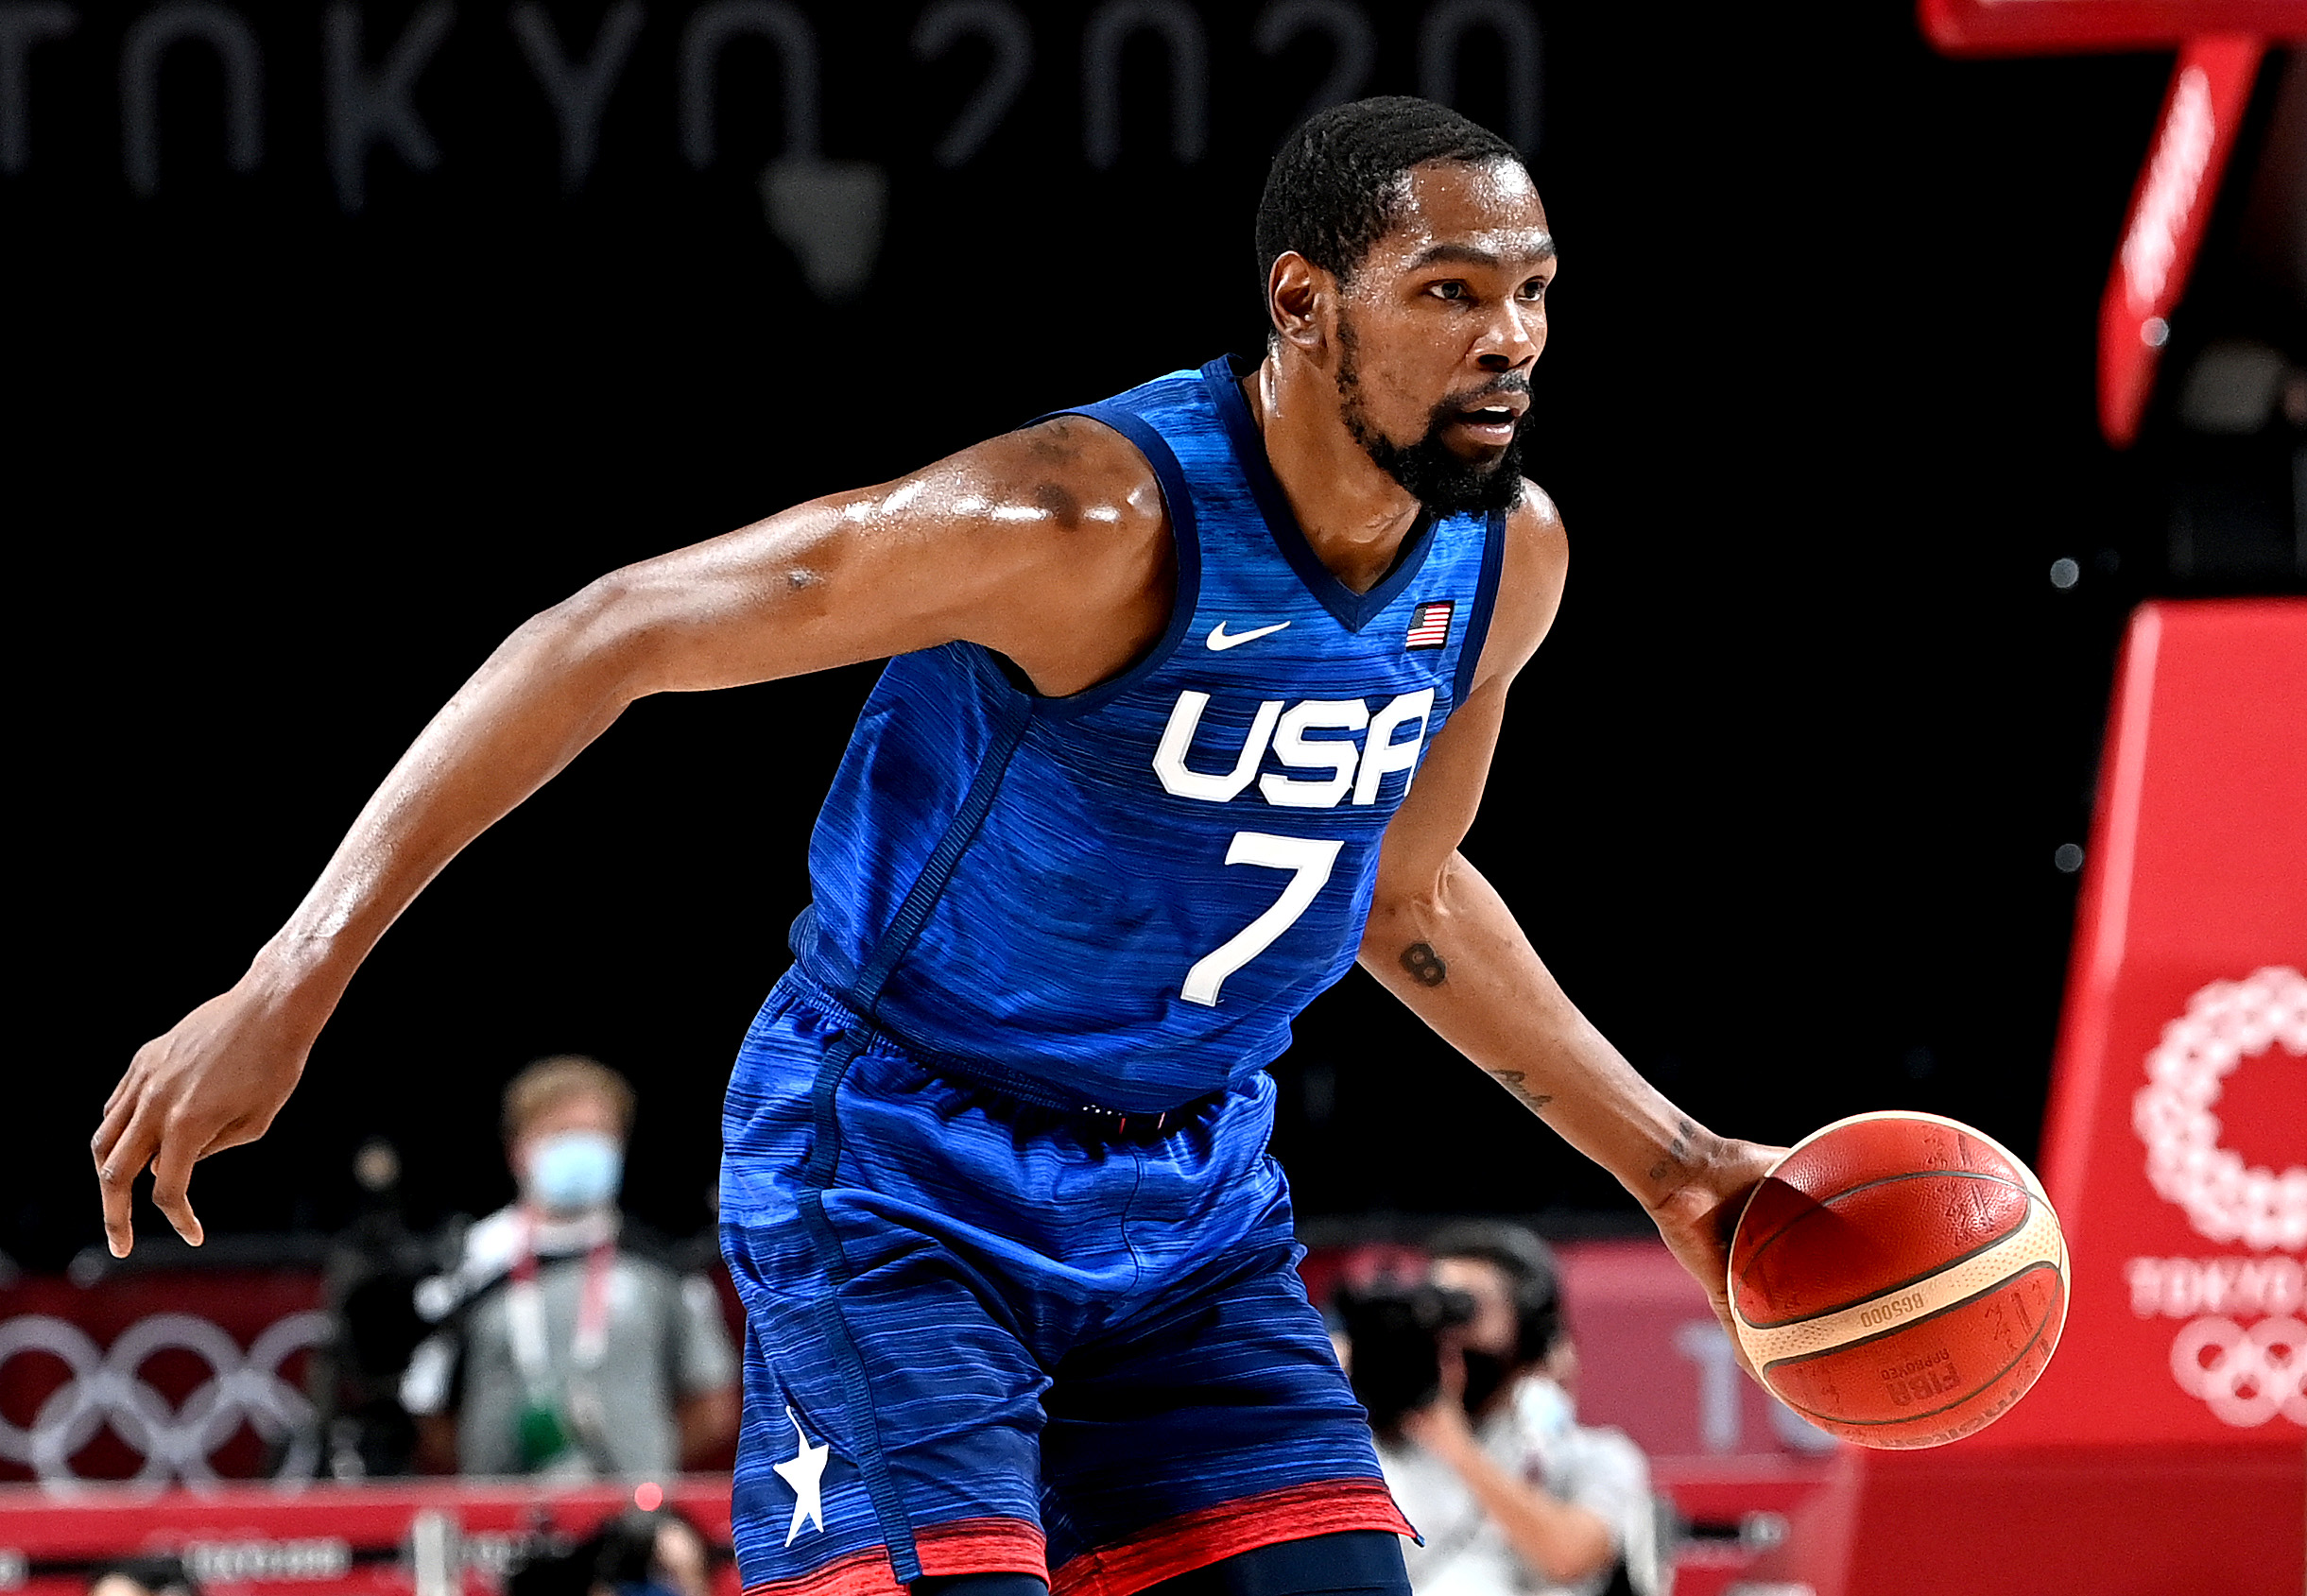 Kevin Durant sizes up a defender during Team USA's win over Spain at the 2020 Tokyo Olympics